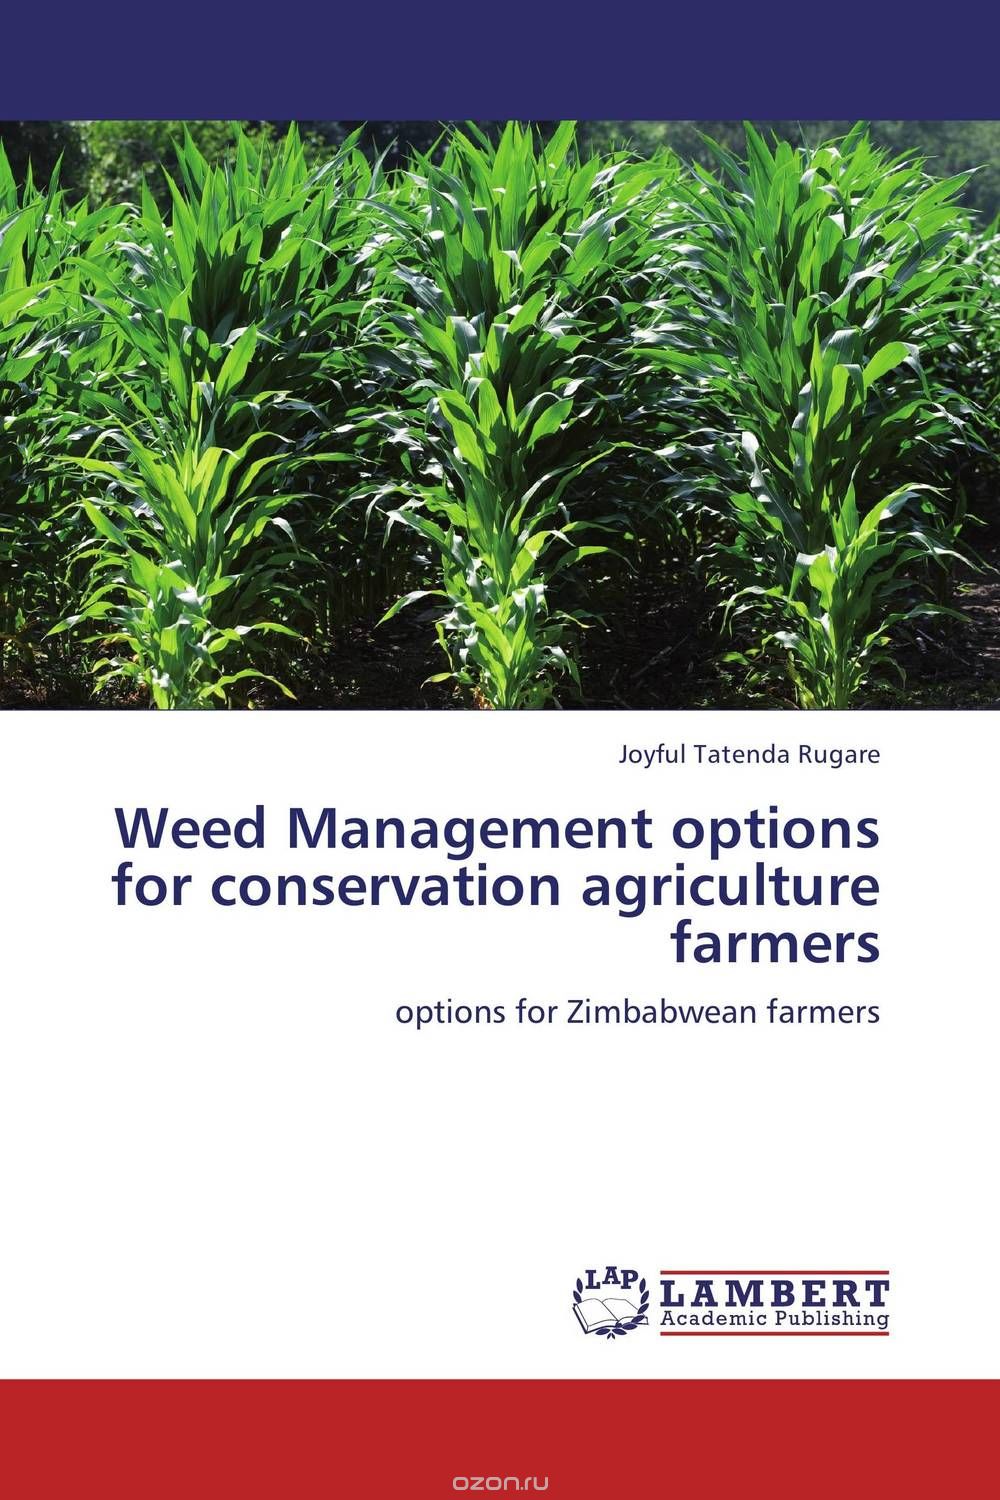 Скачать книгу "Weed Management options for conservation agriculture farmers"